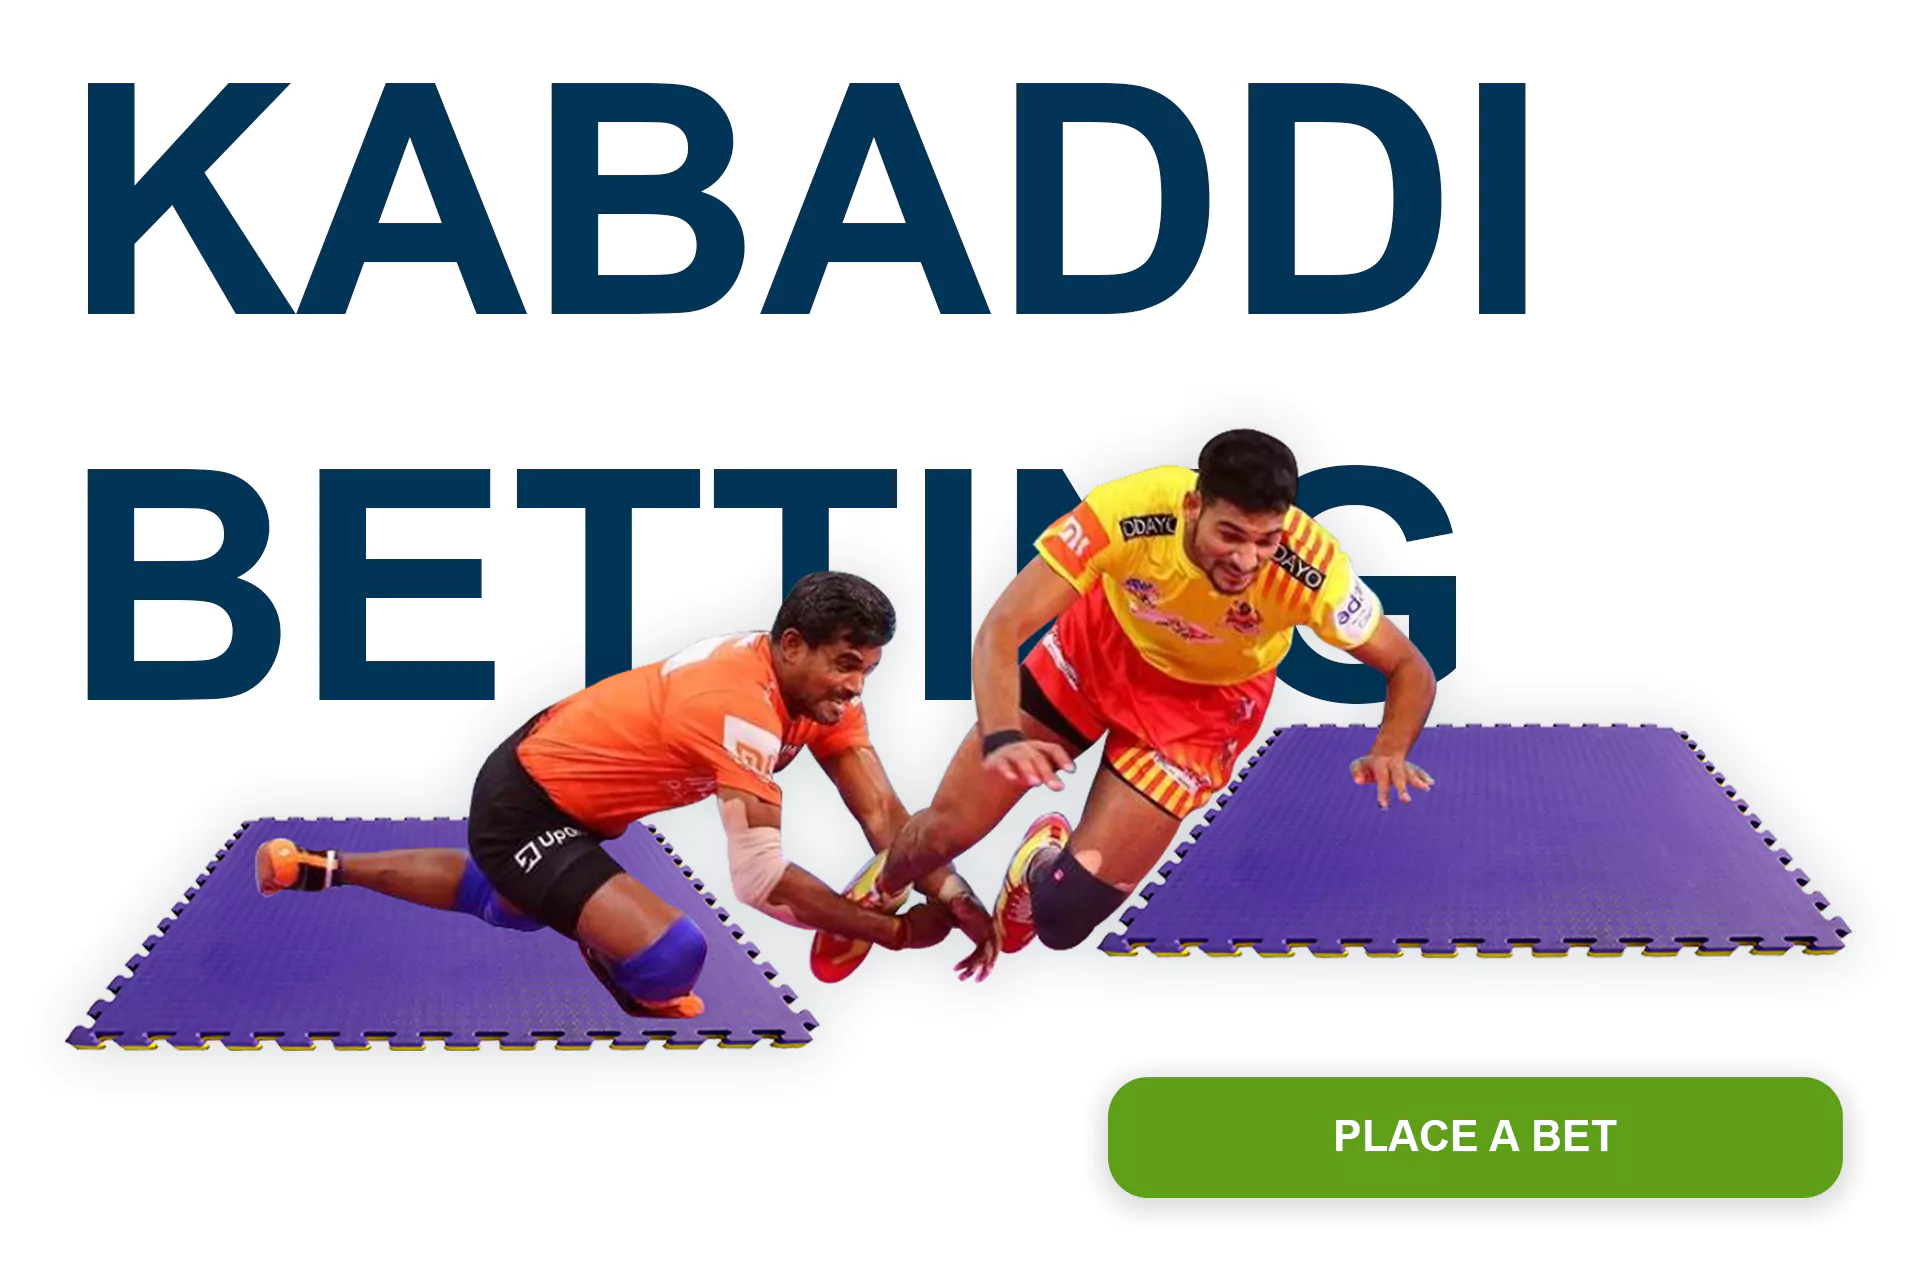 Bet on kabaddi on the official 1xBet website in Bangladesh.